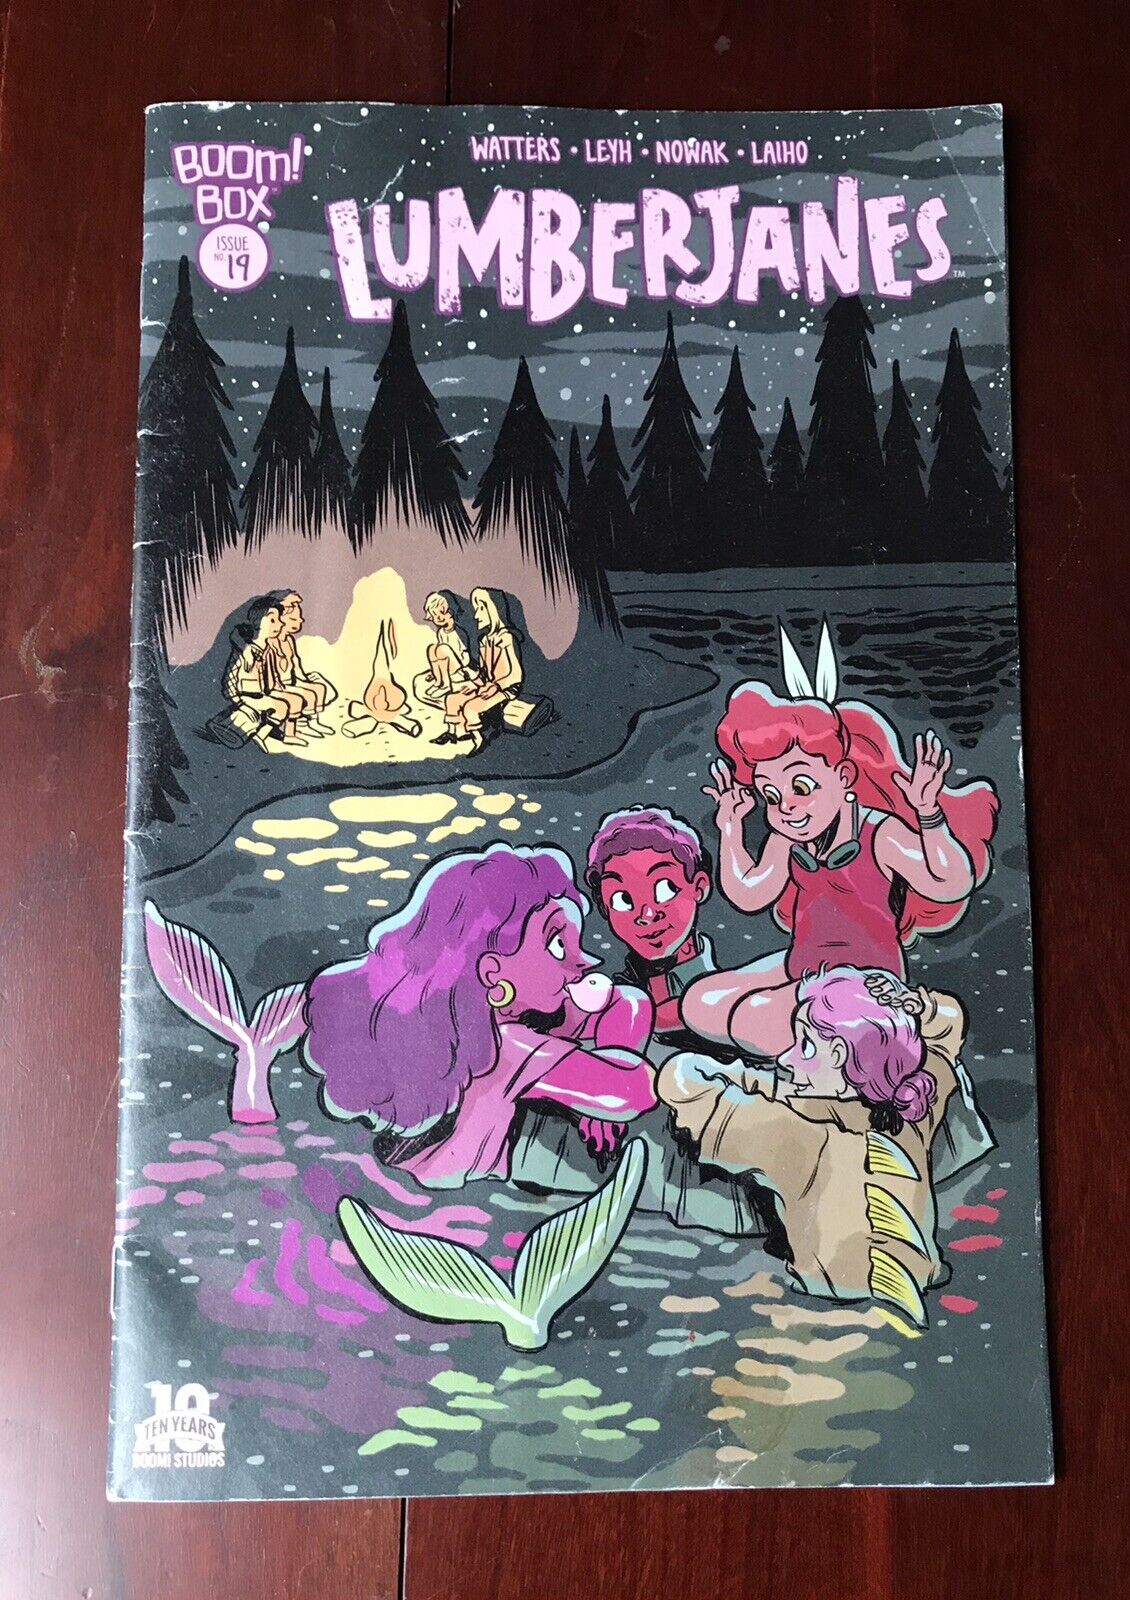 LUMBERJANES # 19 by Shannon Watters October 2015 Comic Book Good Condition